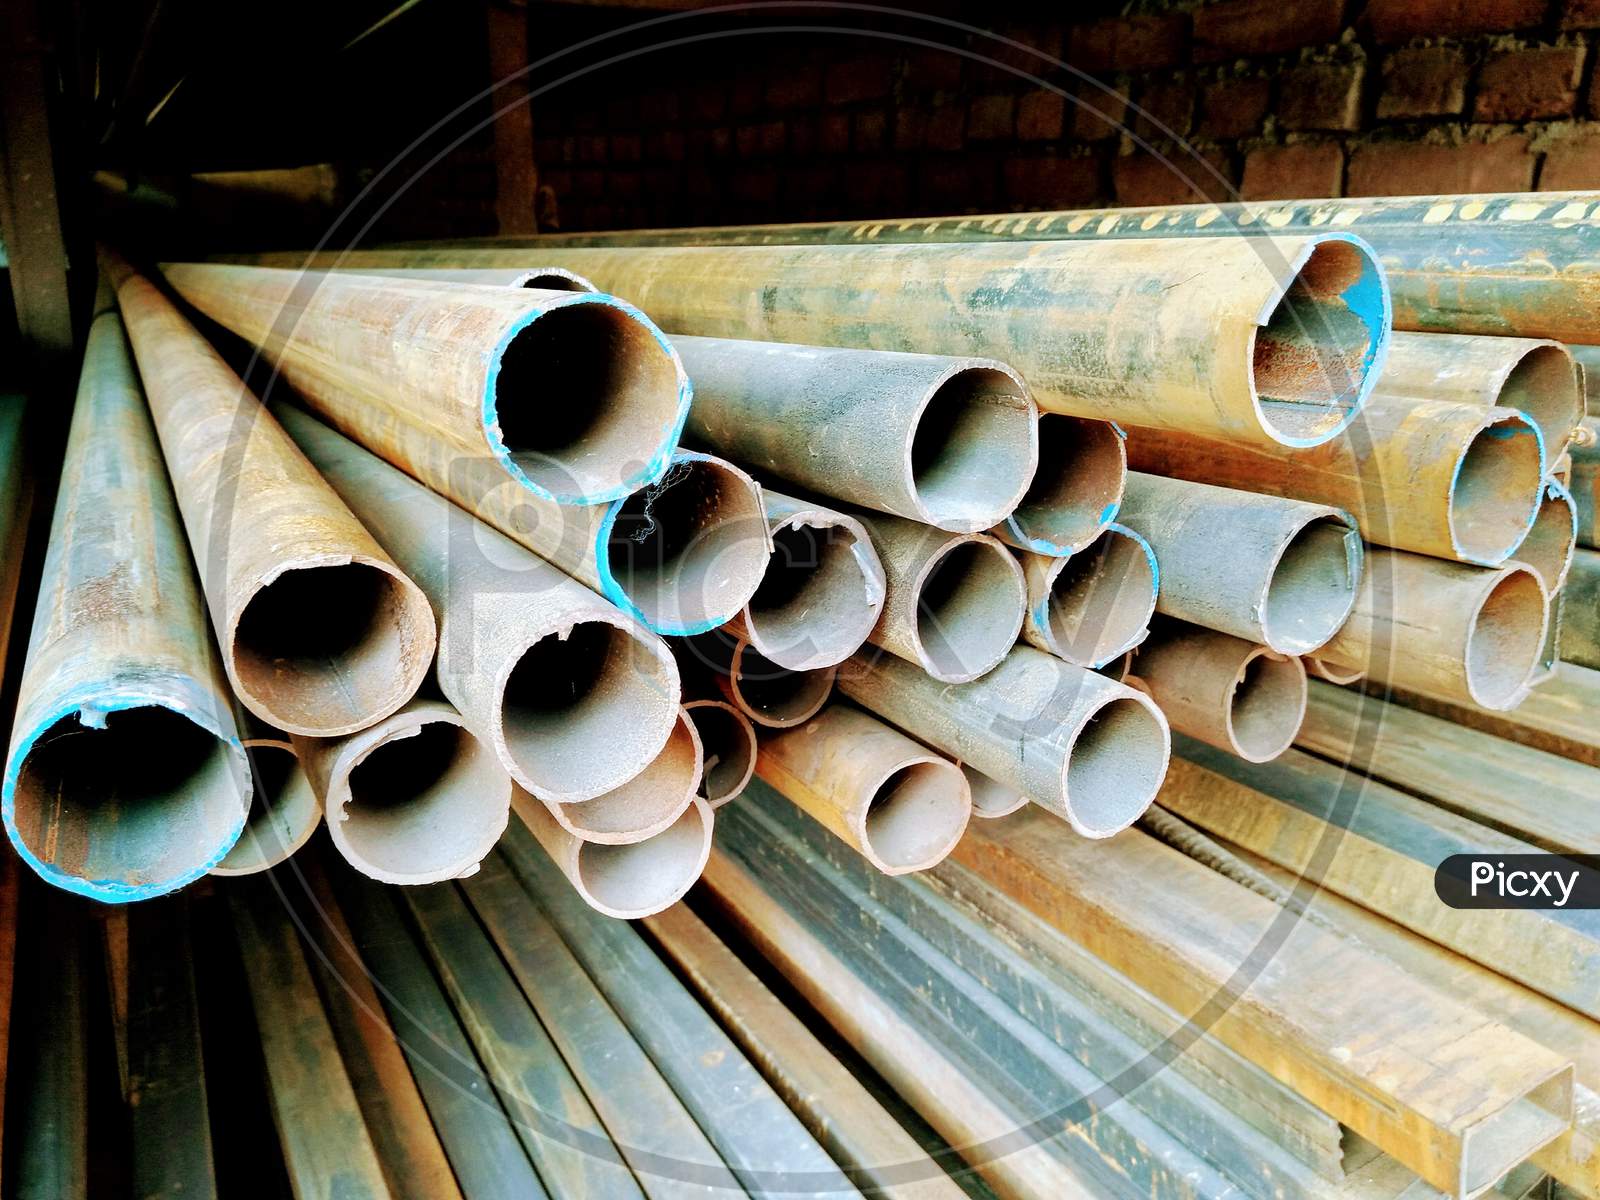 A picture of steel pipes